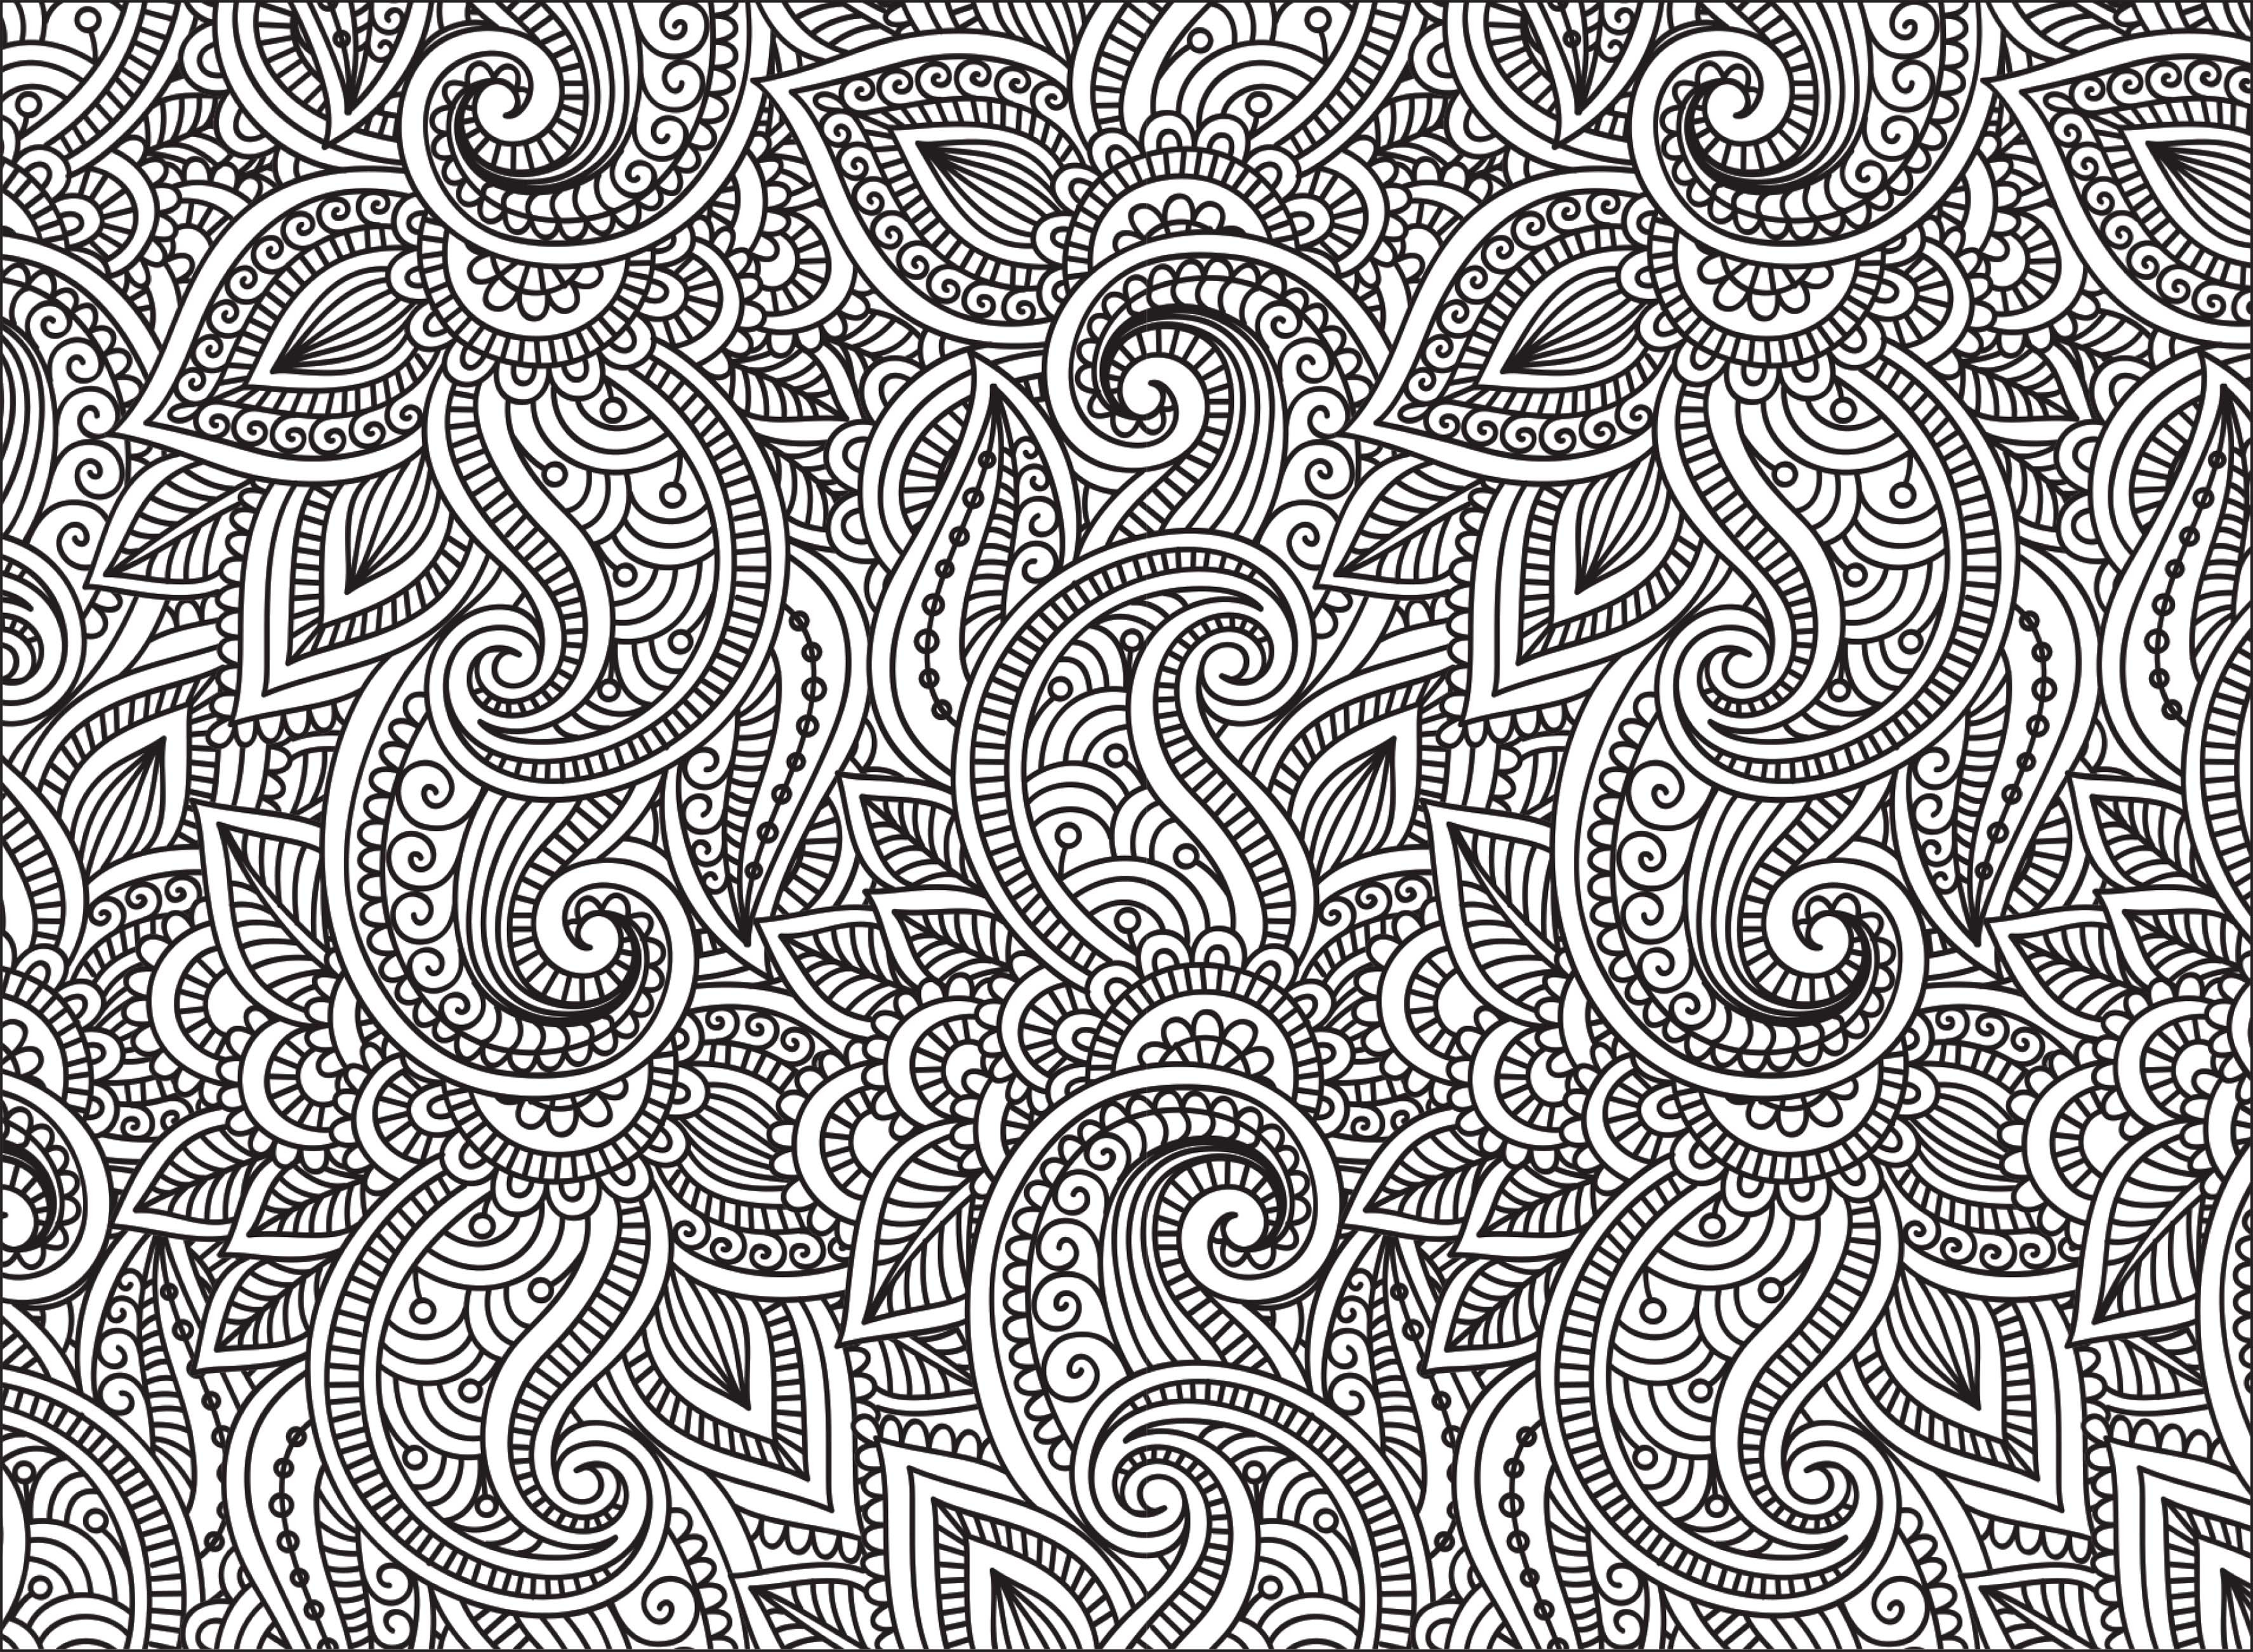 Relax Coloring Sheets For Boys Simple
 Relaxing Coloring Pages coloringsuite